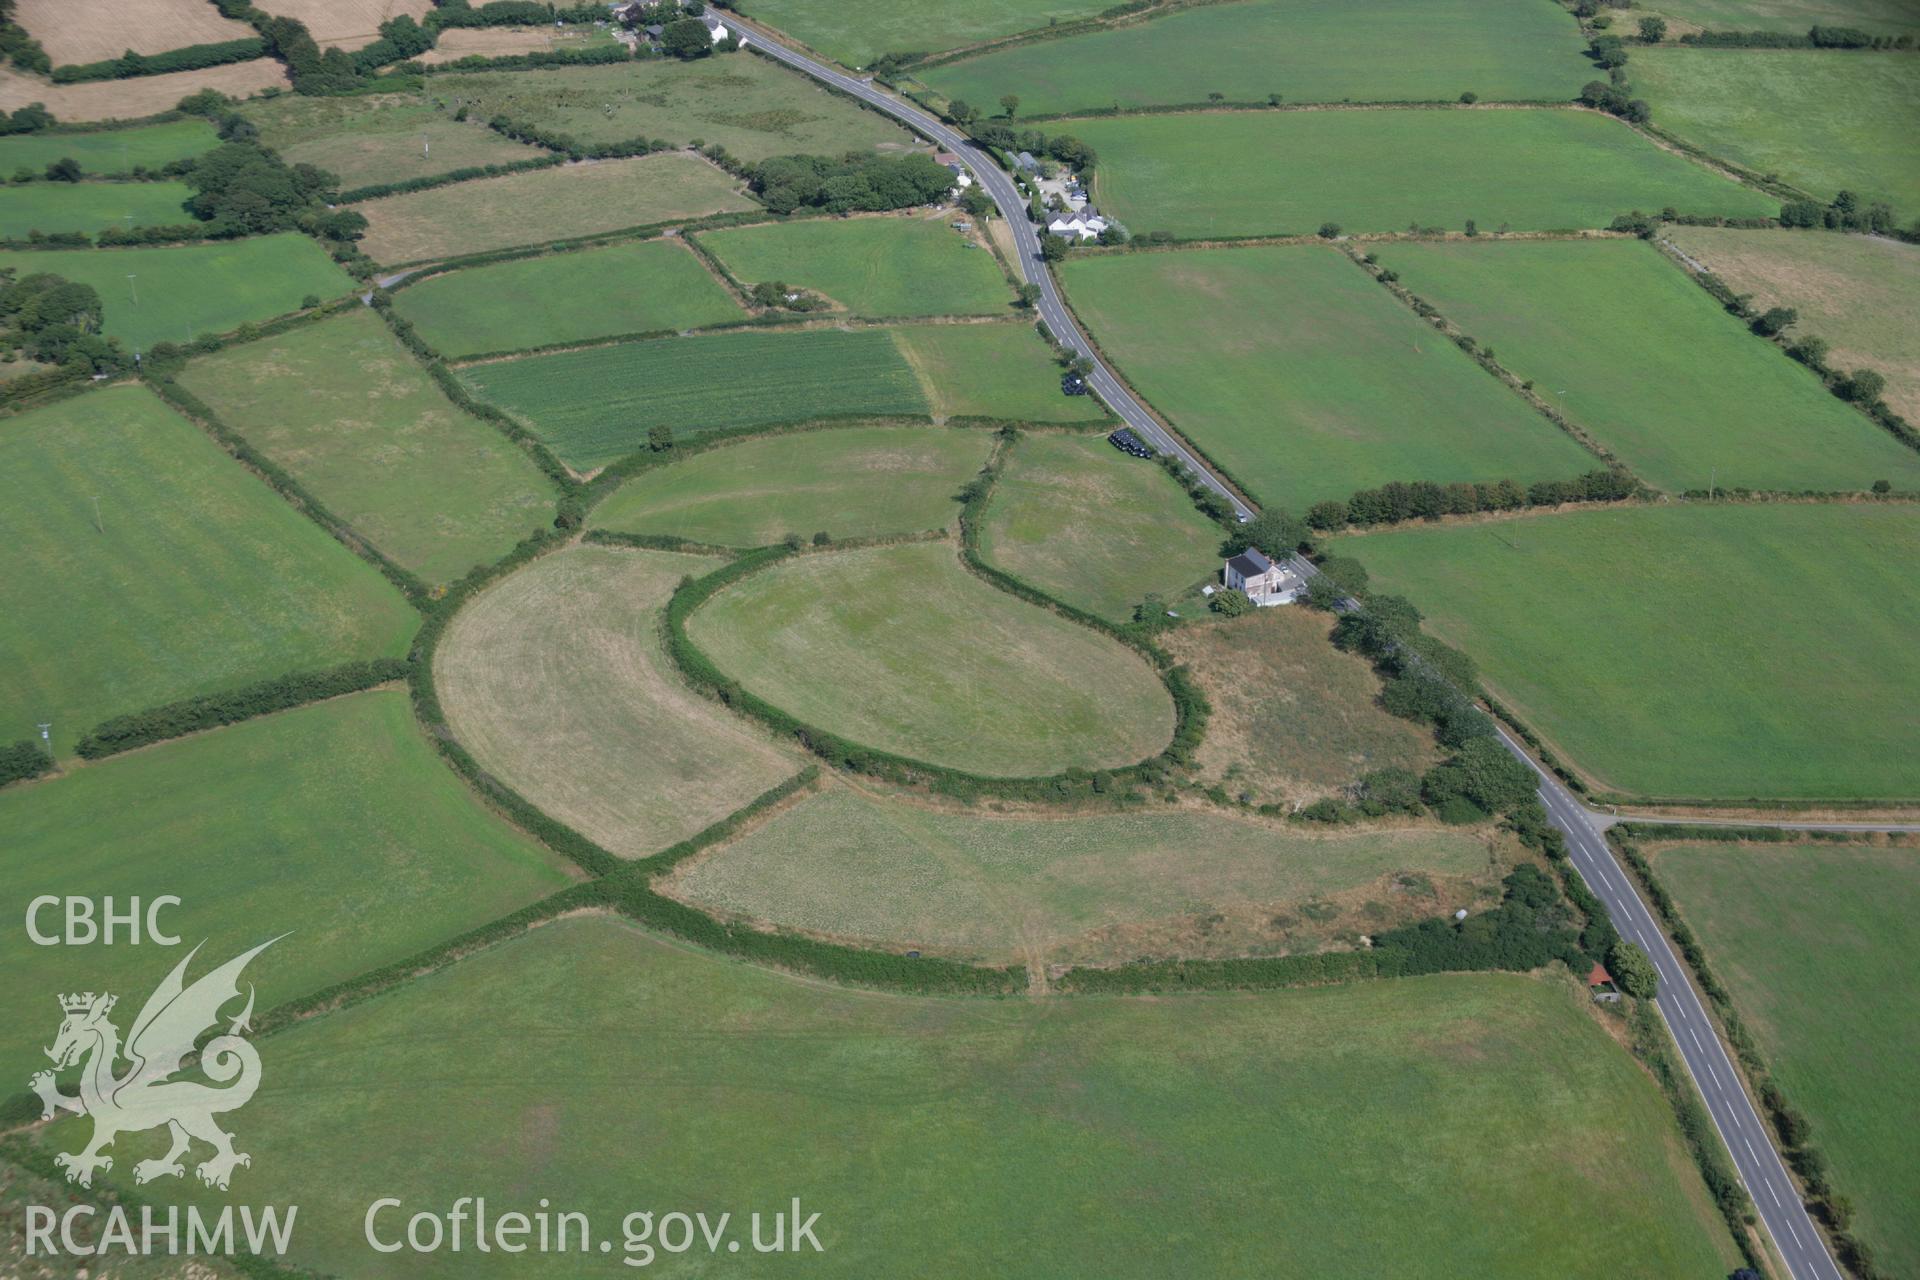 RCAHMW colour oblique aerial photograph of Castell Nadolig. Taken on 27 July 2006 by Toby Driver.